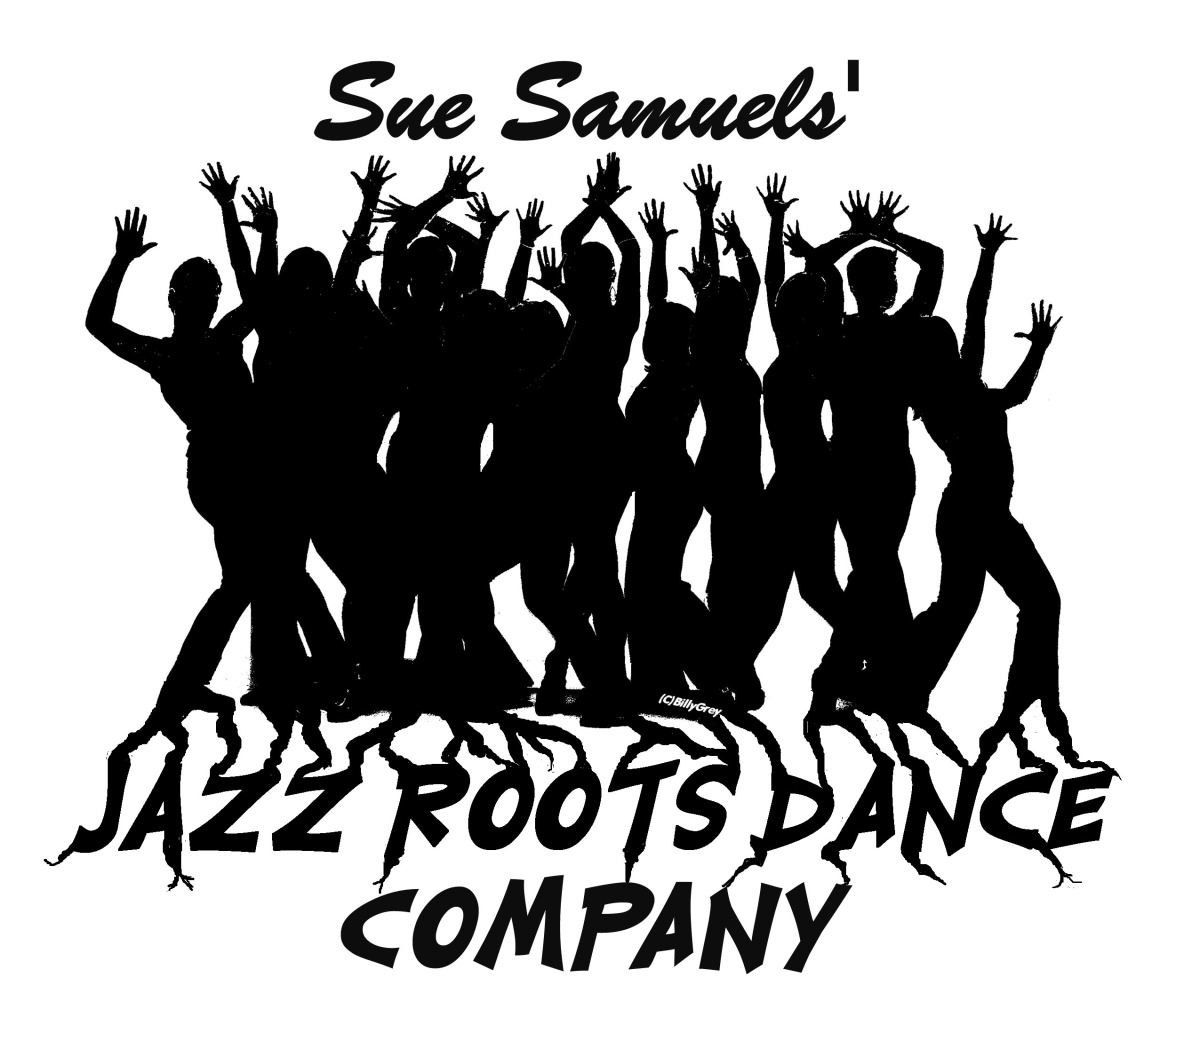 Jazz Roots Dance: The Jo Jo Smith Legacy Project